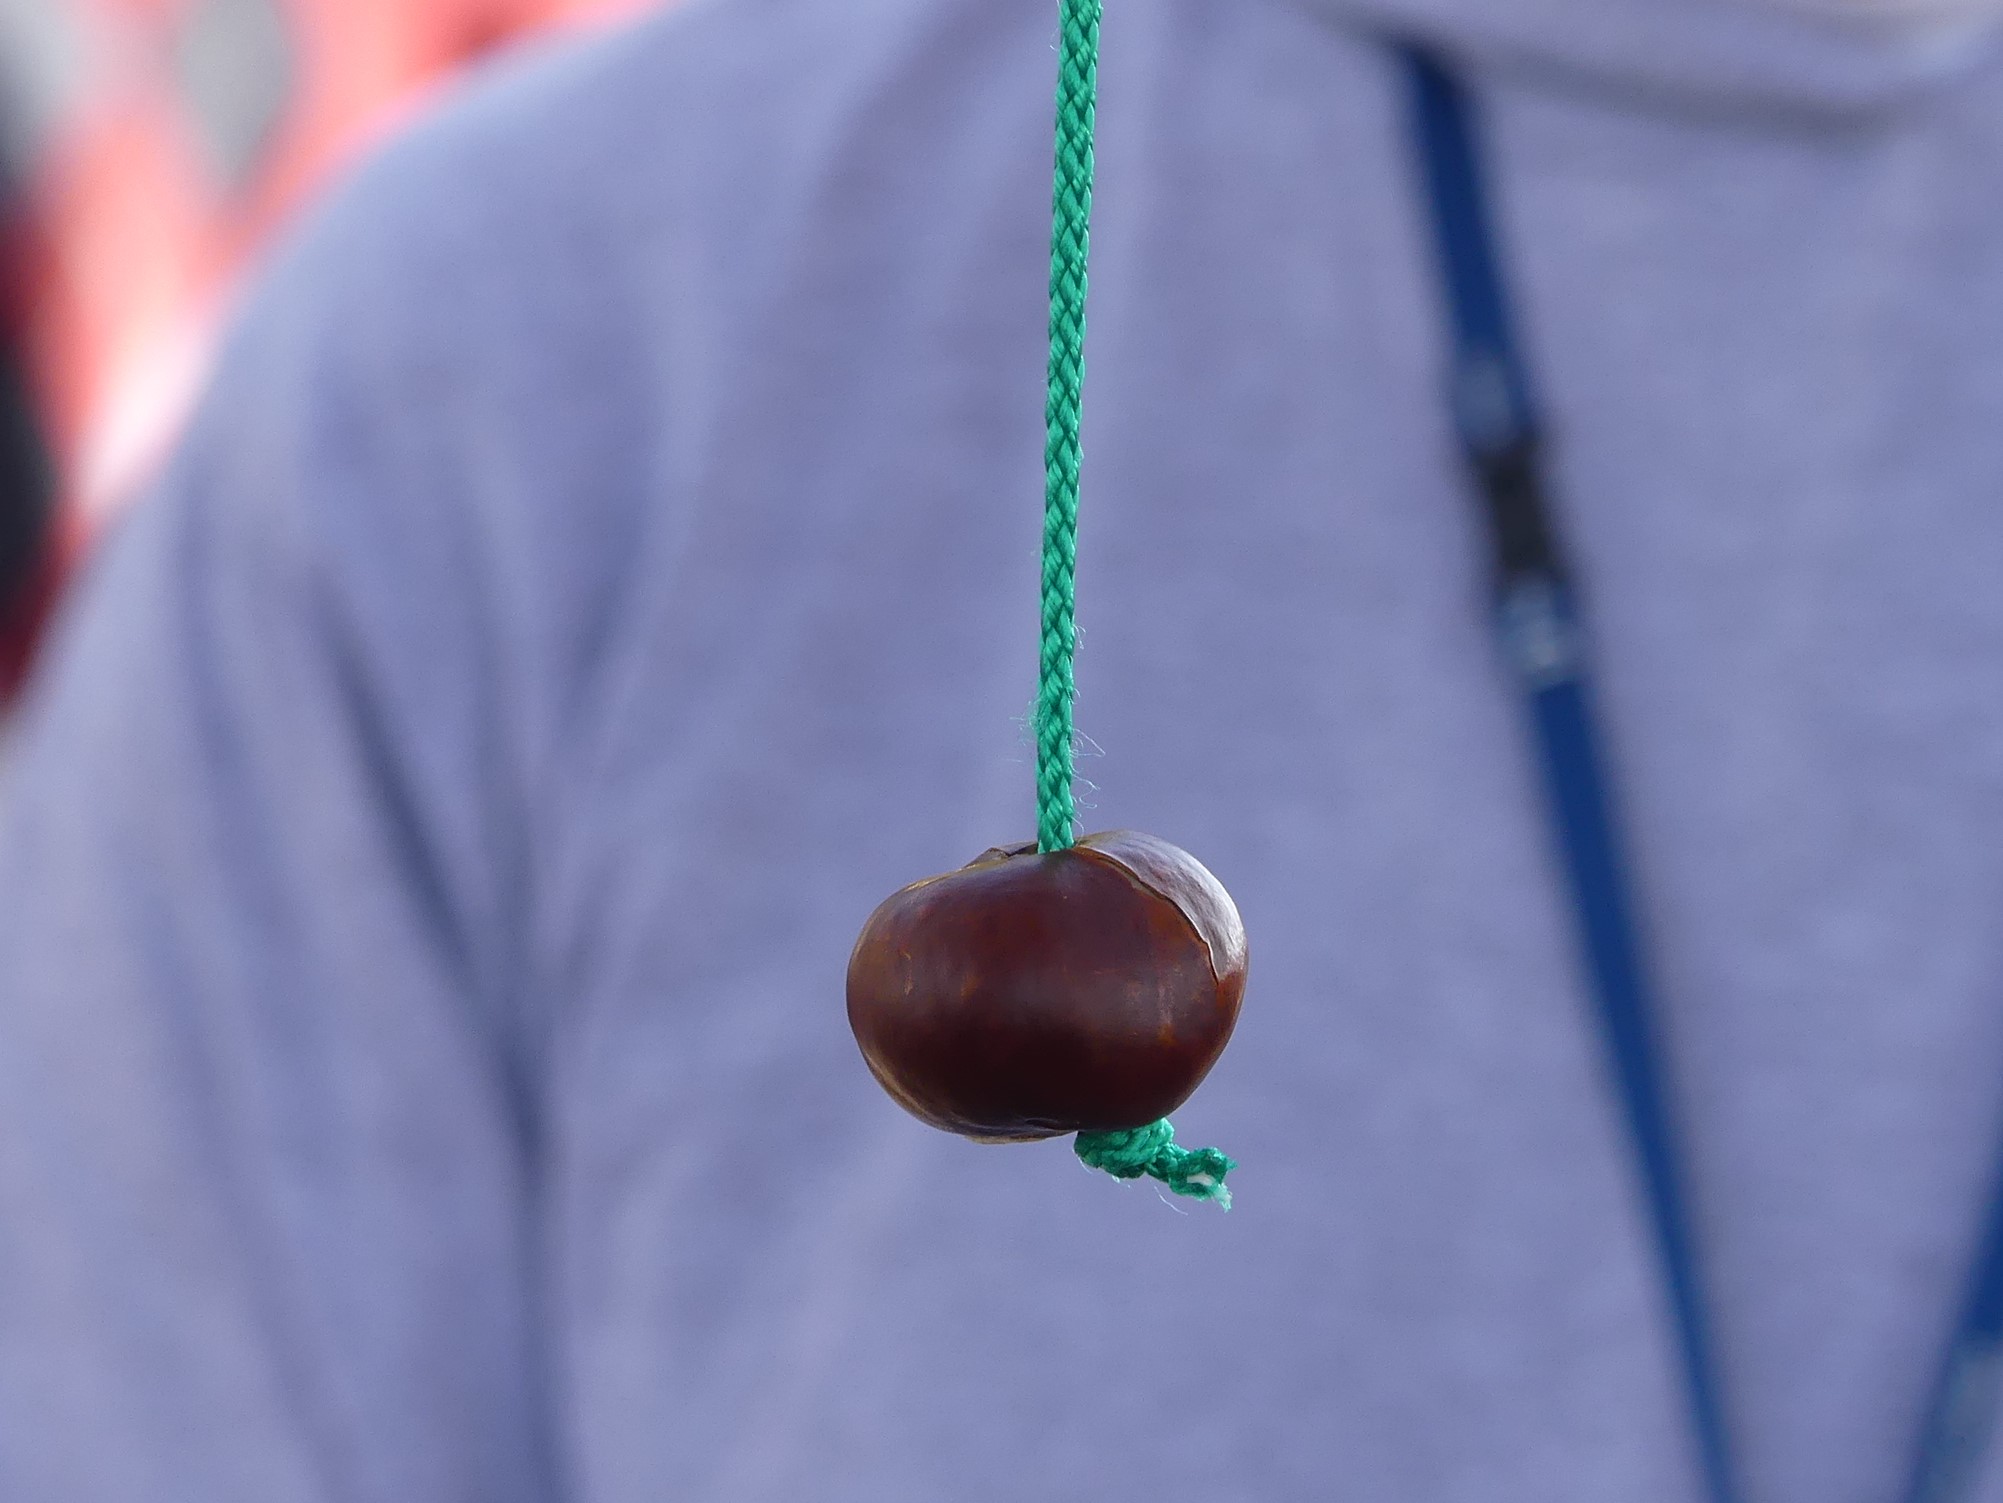 An image of someone holding a conker on a lace.